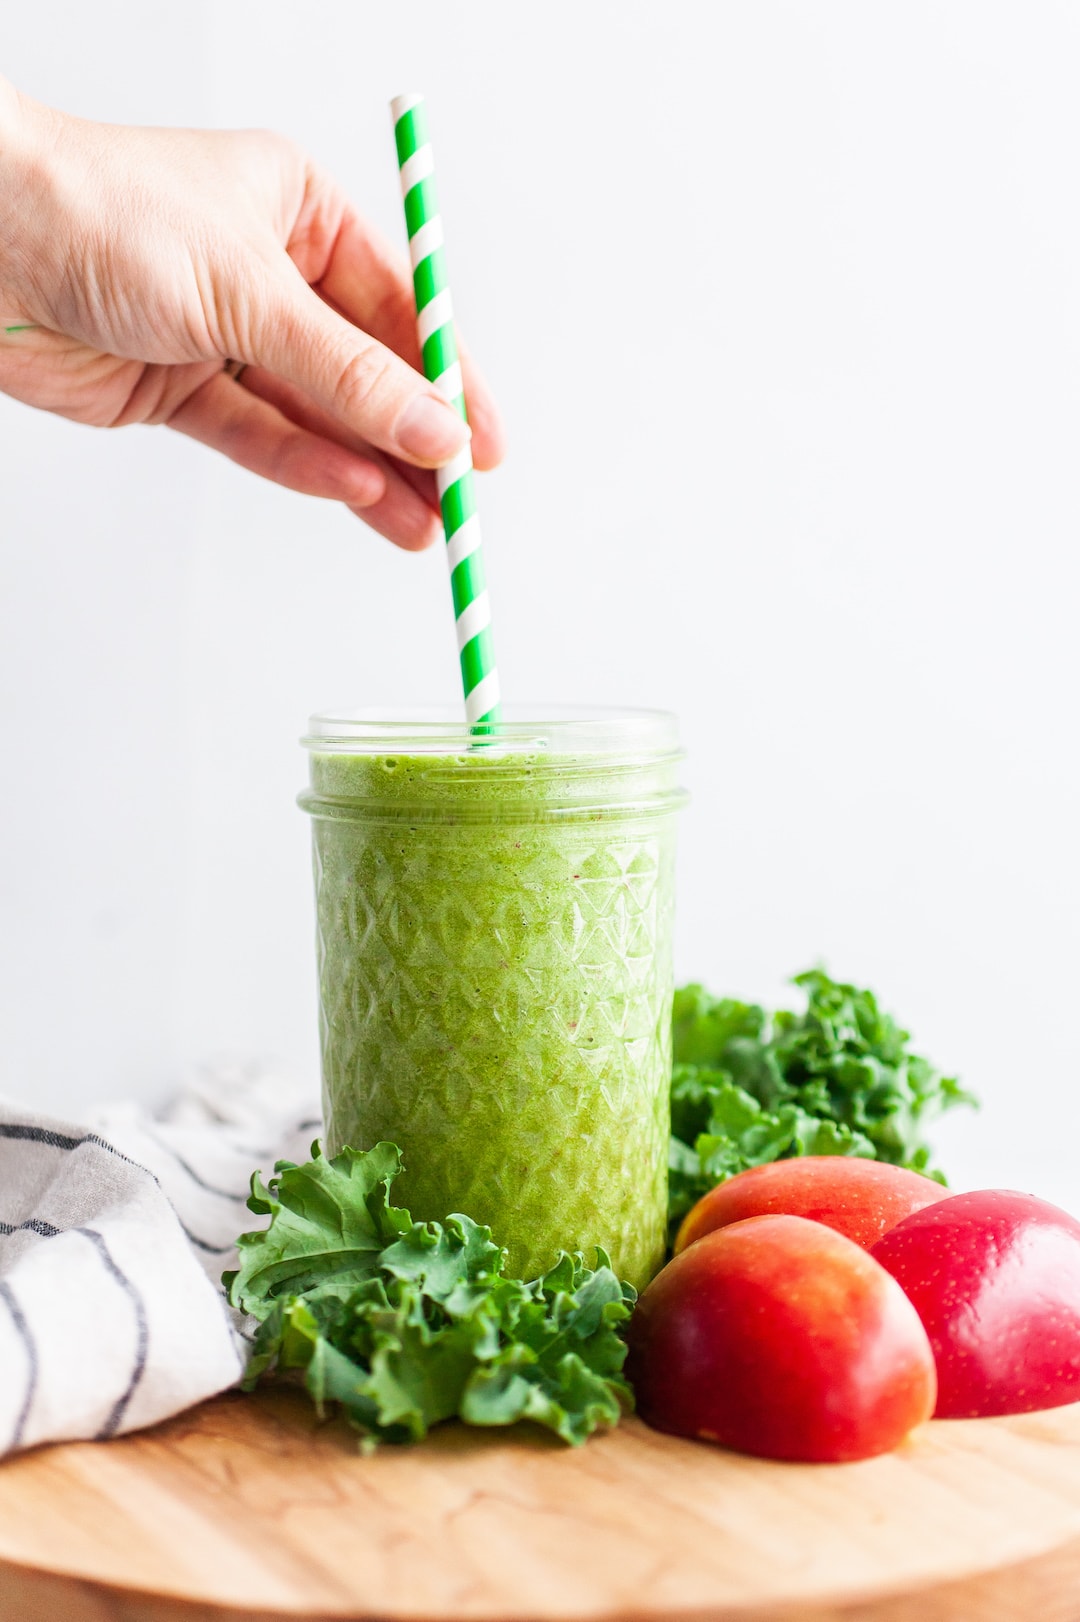 image of an apple greens smoothie against a white background with a hand putting a straw in the smoothie